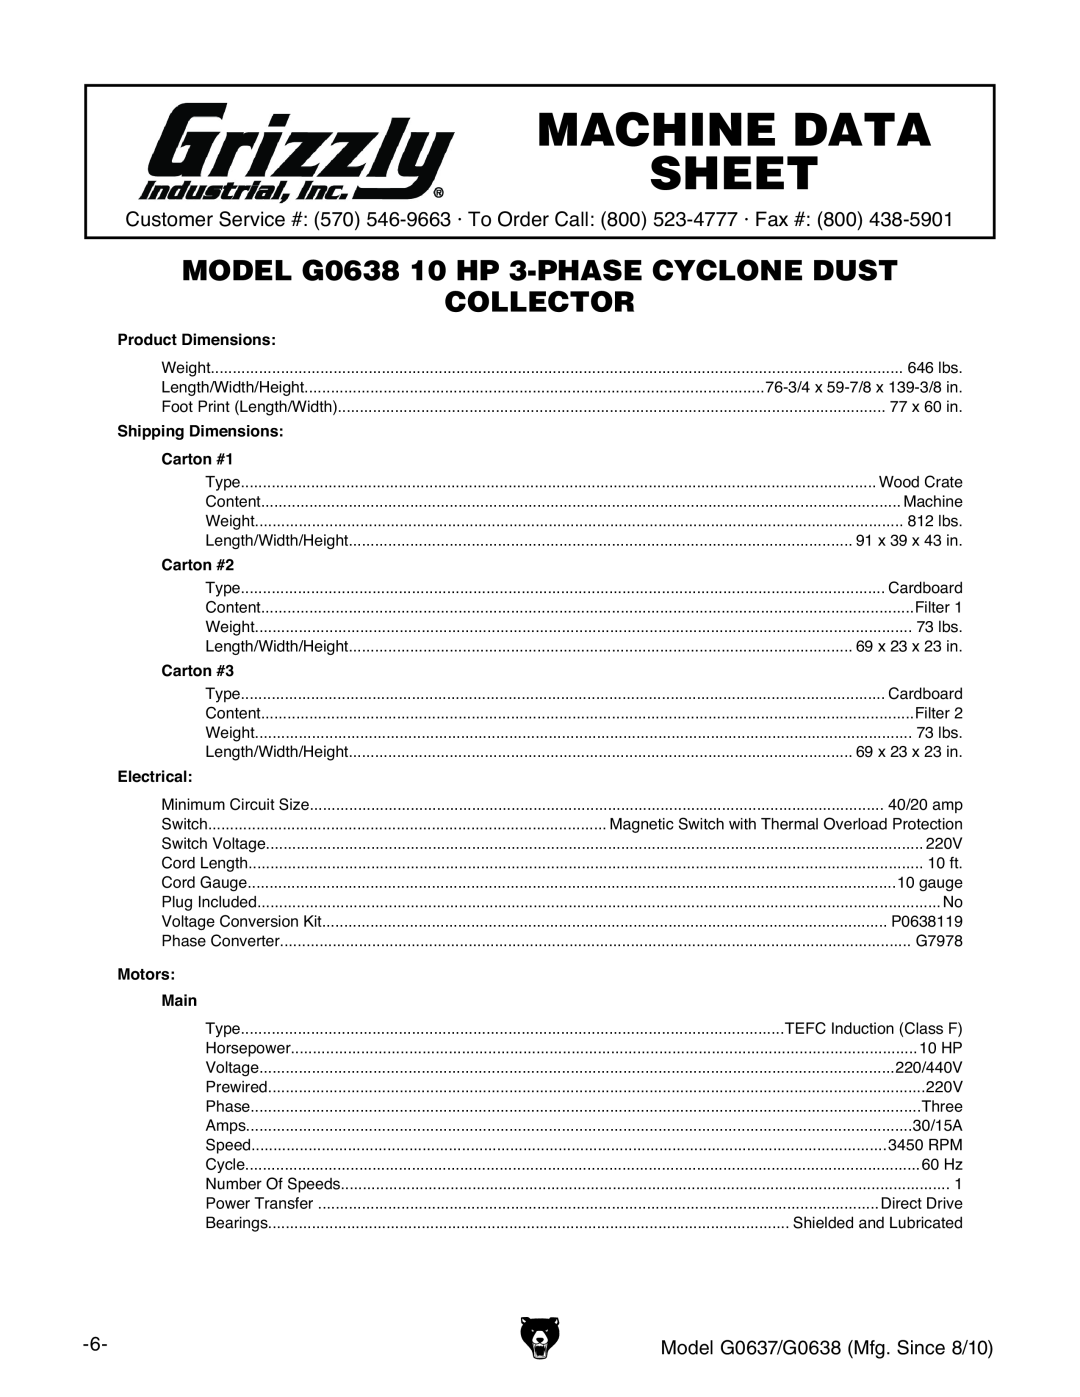 Grizzly G0637 MODEL G0638 10 HP 3-PHASECYCLONE DUST COLLECTOR, Machine Data Sheet, Product Dimensions, Shipping Dimensions 